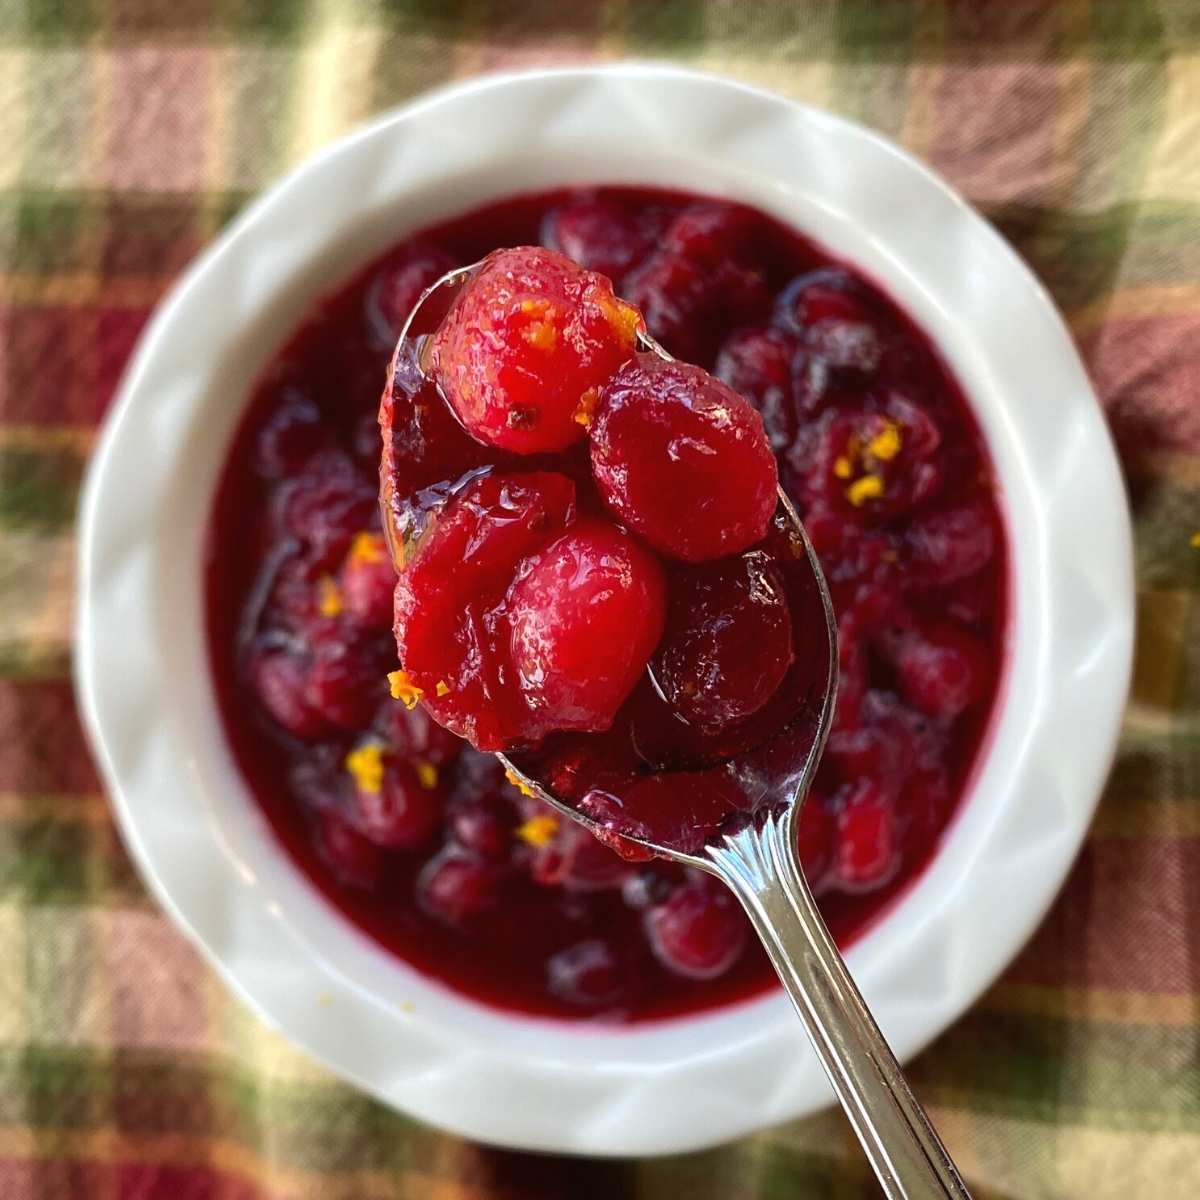 Spoon lifting healthy cranberry sauce out of the bowl below.